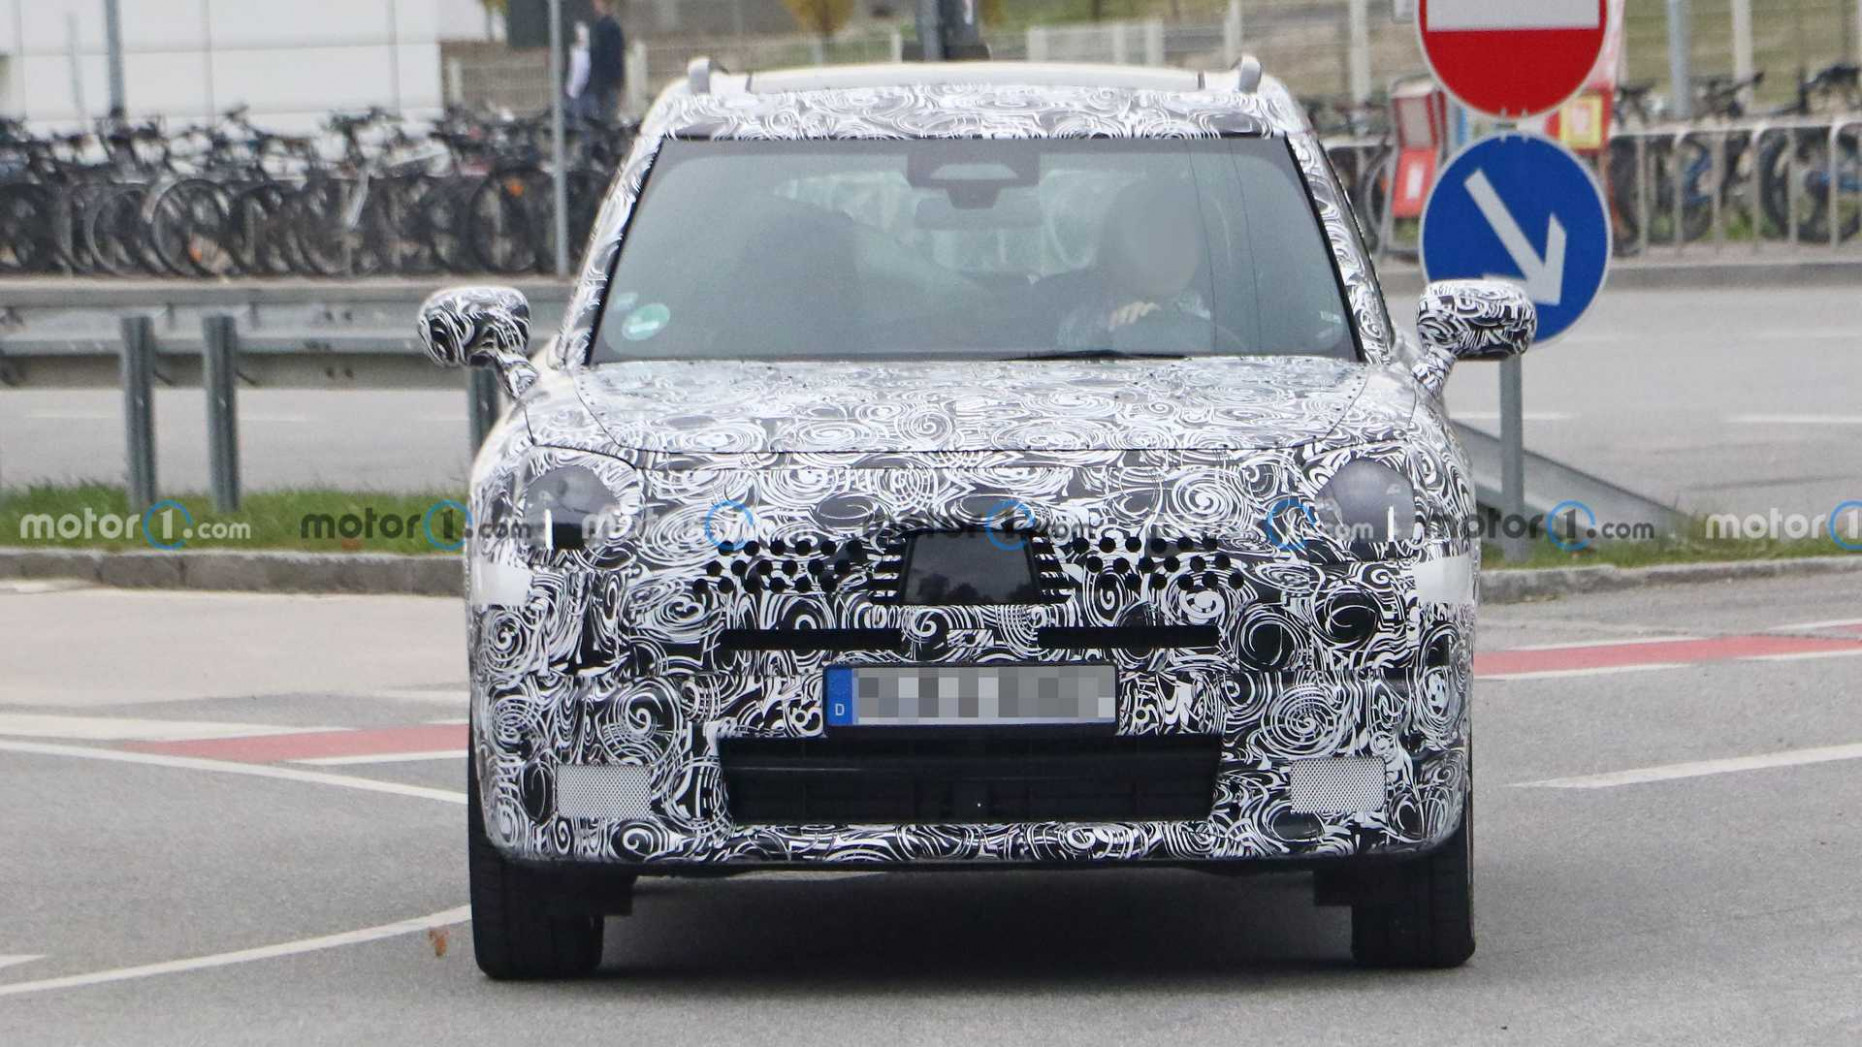 10 Mini Countryman Spied For The First Time Looking Large And In  - Spy Shots Mini Countryman